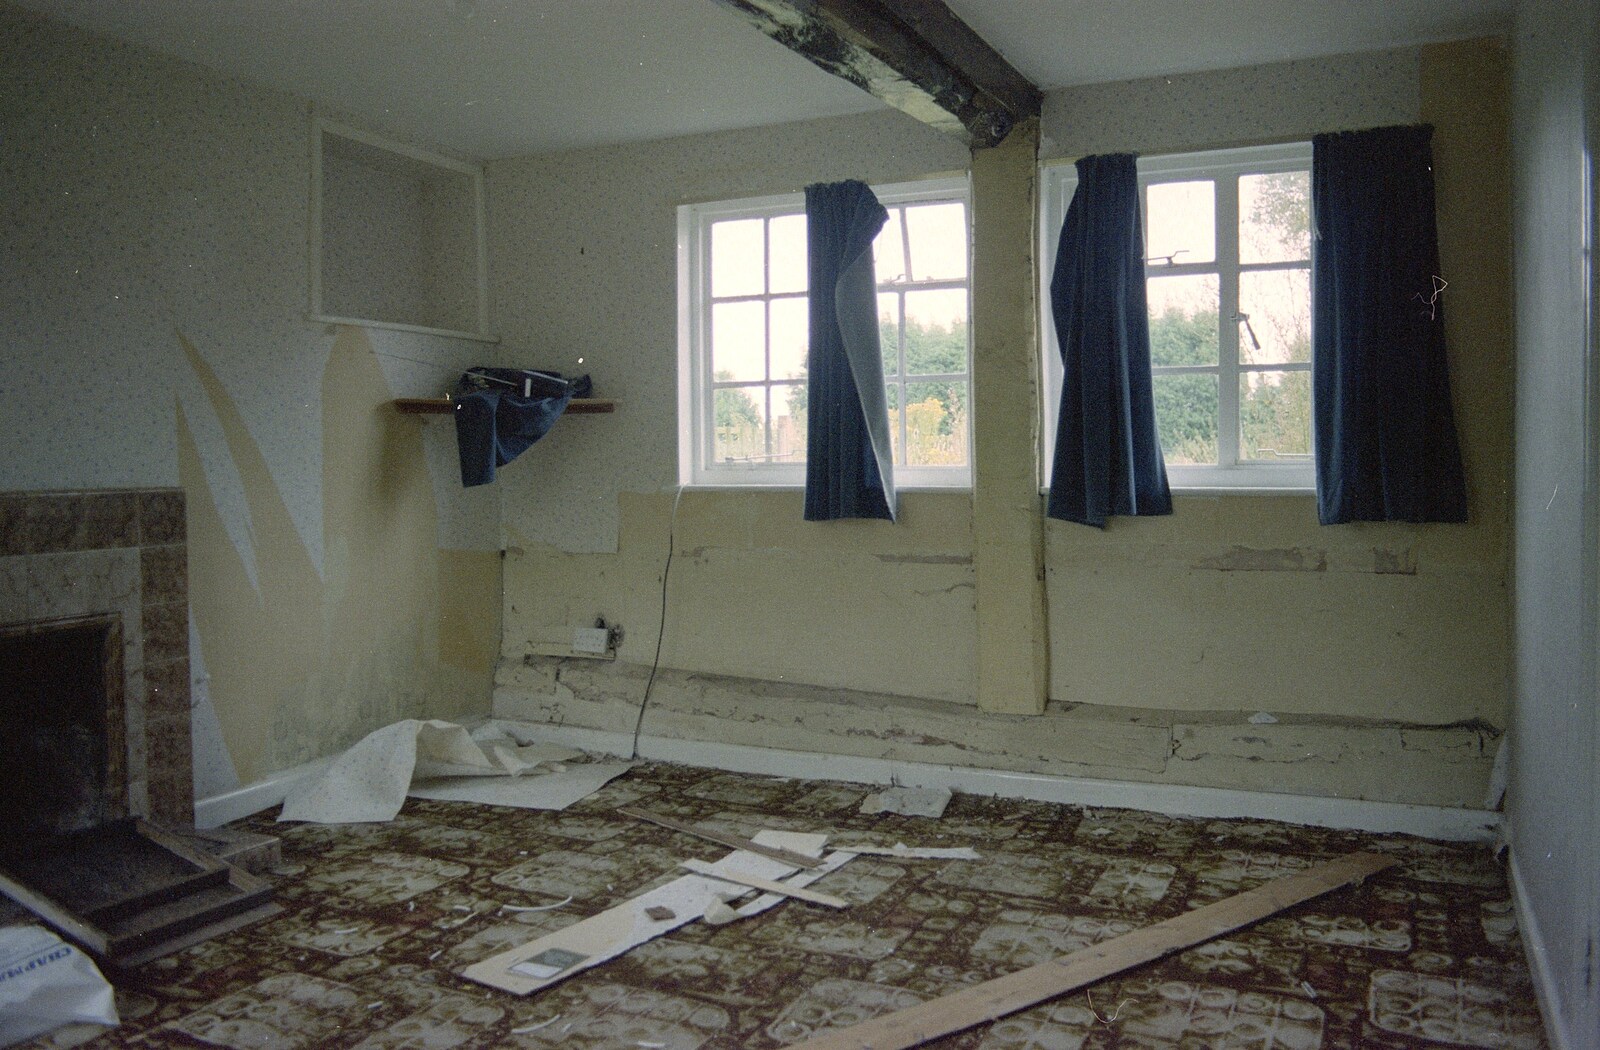 The lounge has been extensively covered up from Moving In, Brome, Suffolk - 10th April 1994